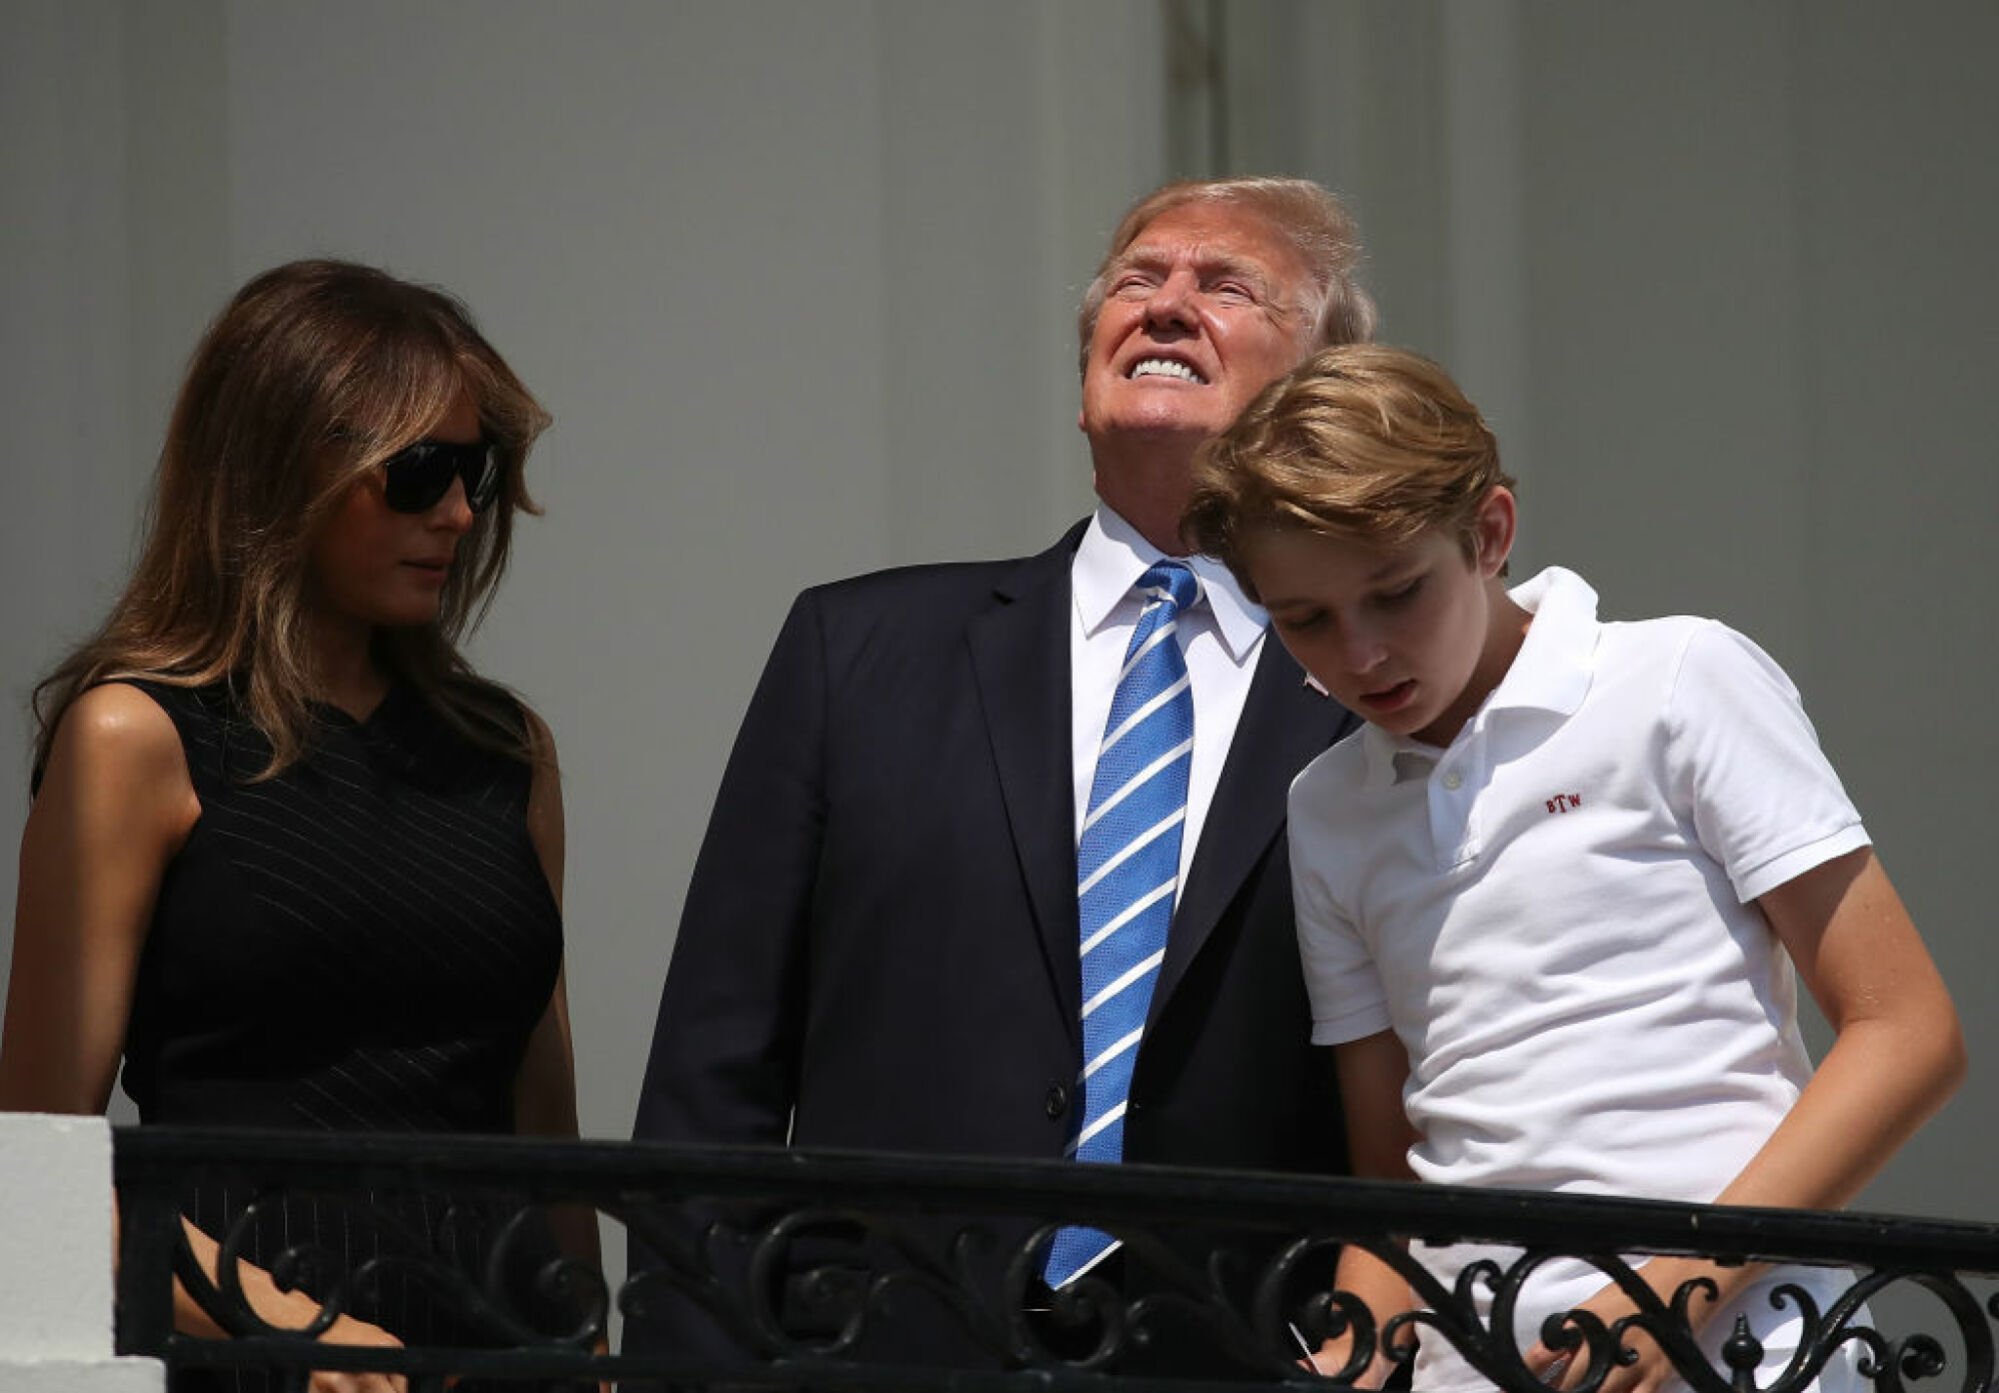 President Donald Trump squinting during the solar eclipse